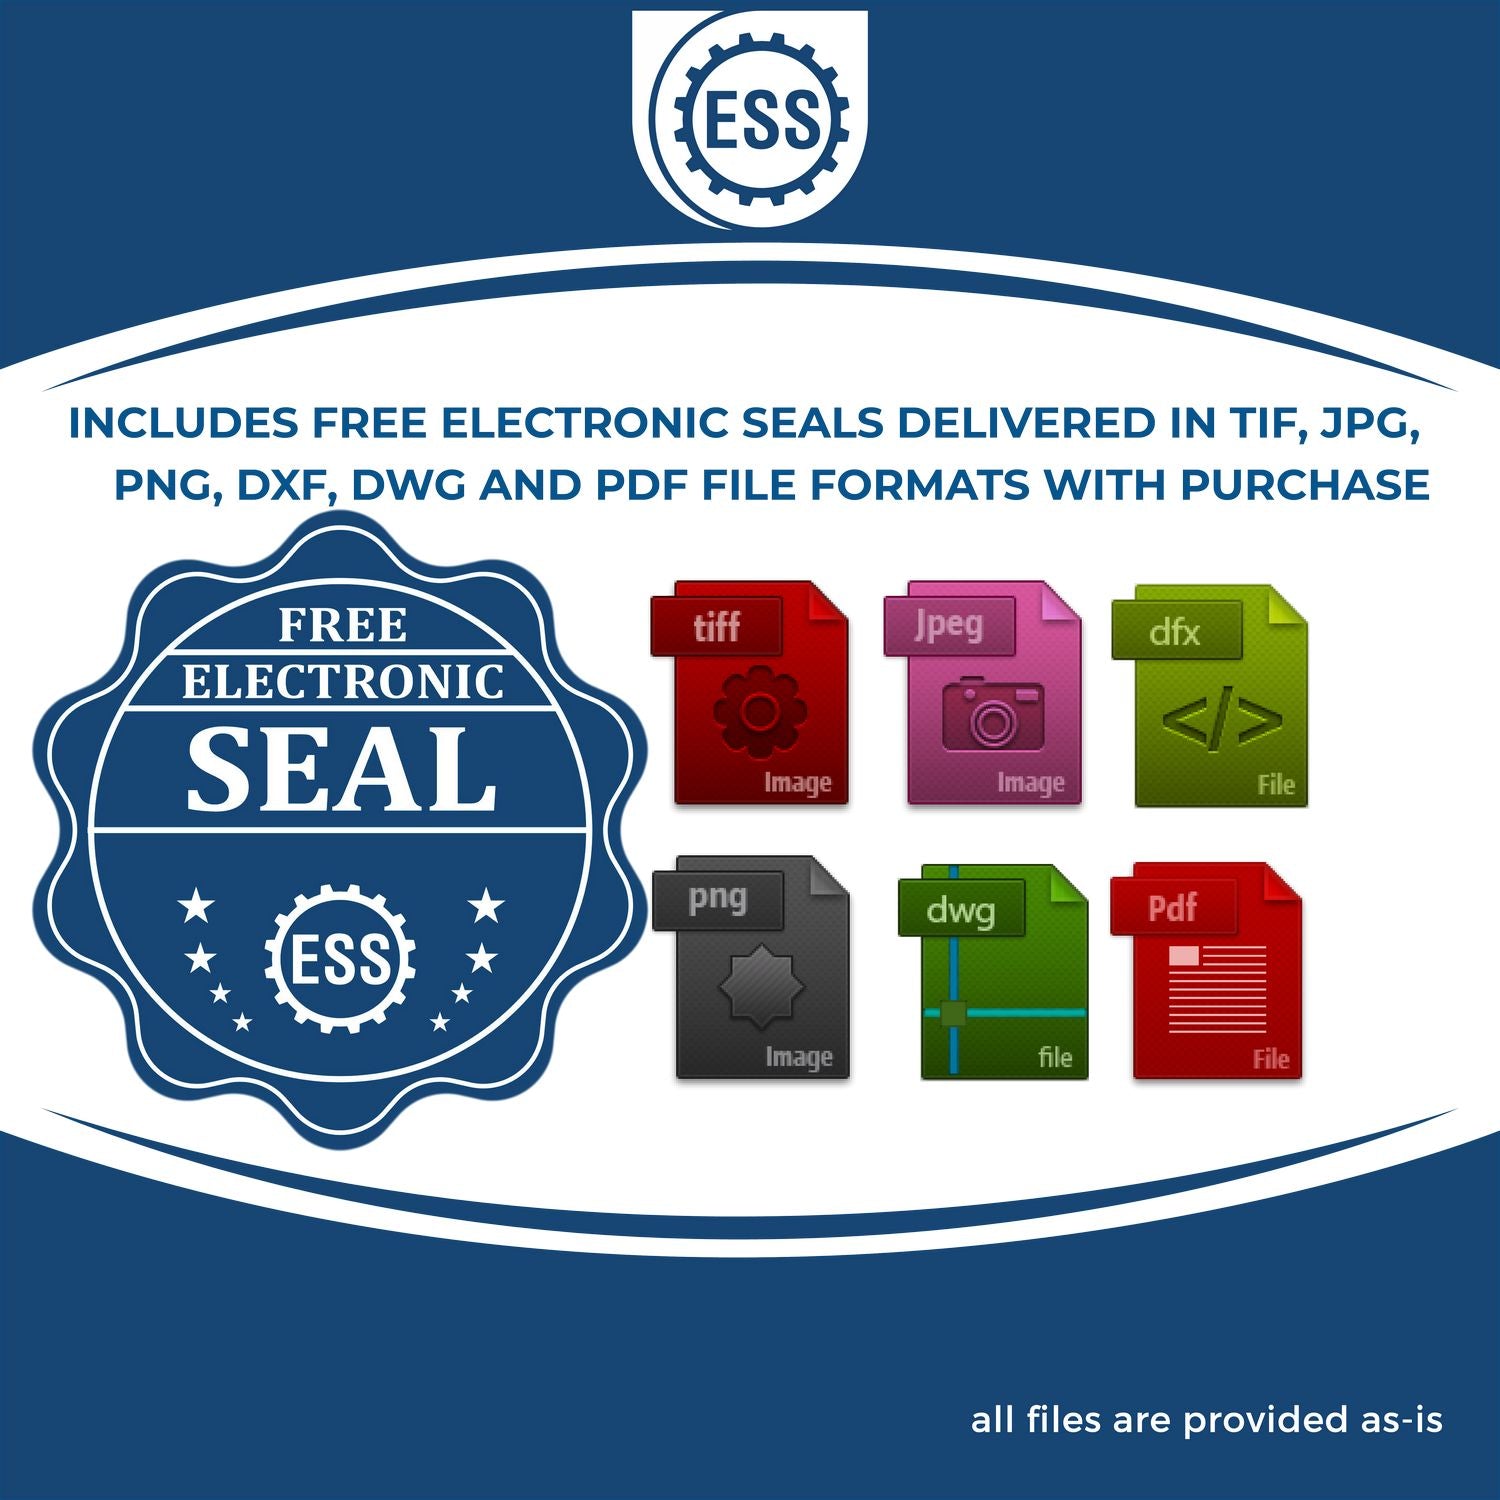 An infographic for the free electronic seal for the Michigan Professional Engineer Seal Stamp illustrating the different file type icons such as DXF, DWG, TIF, JPG and PNG.